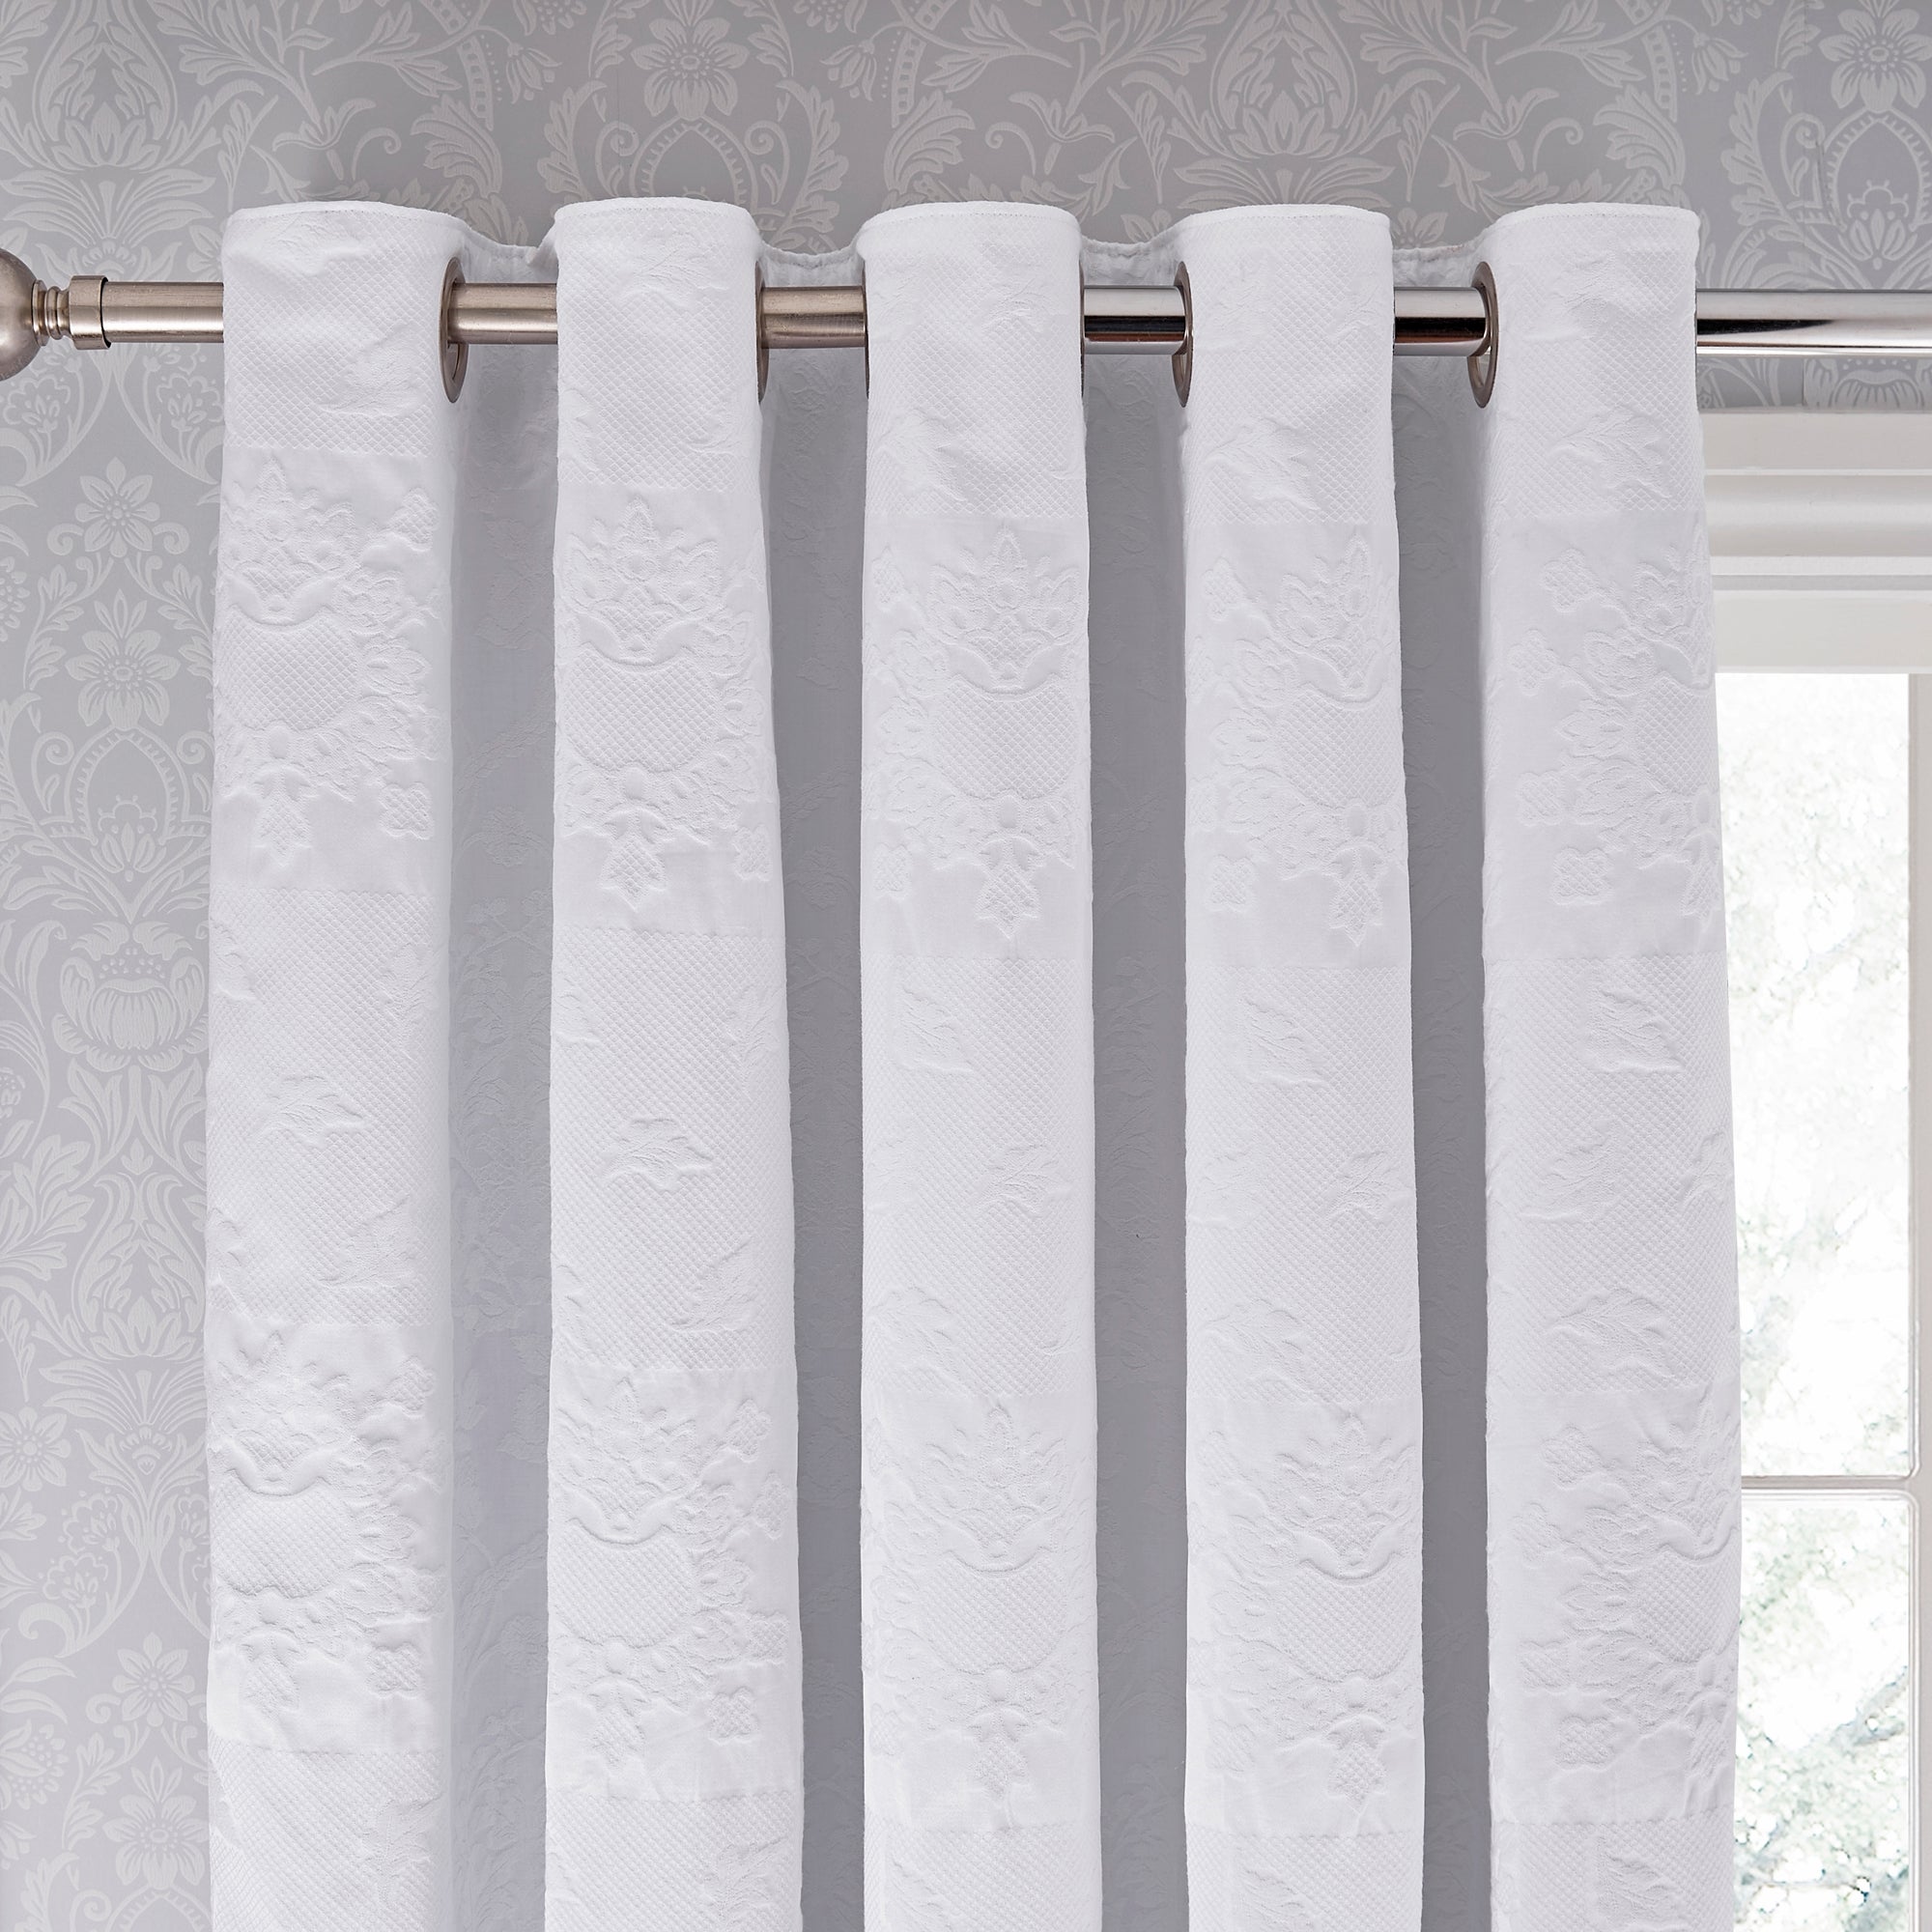 Dorma Purity Kempley Blackout Eyelet Curtains White